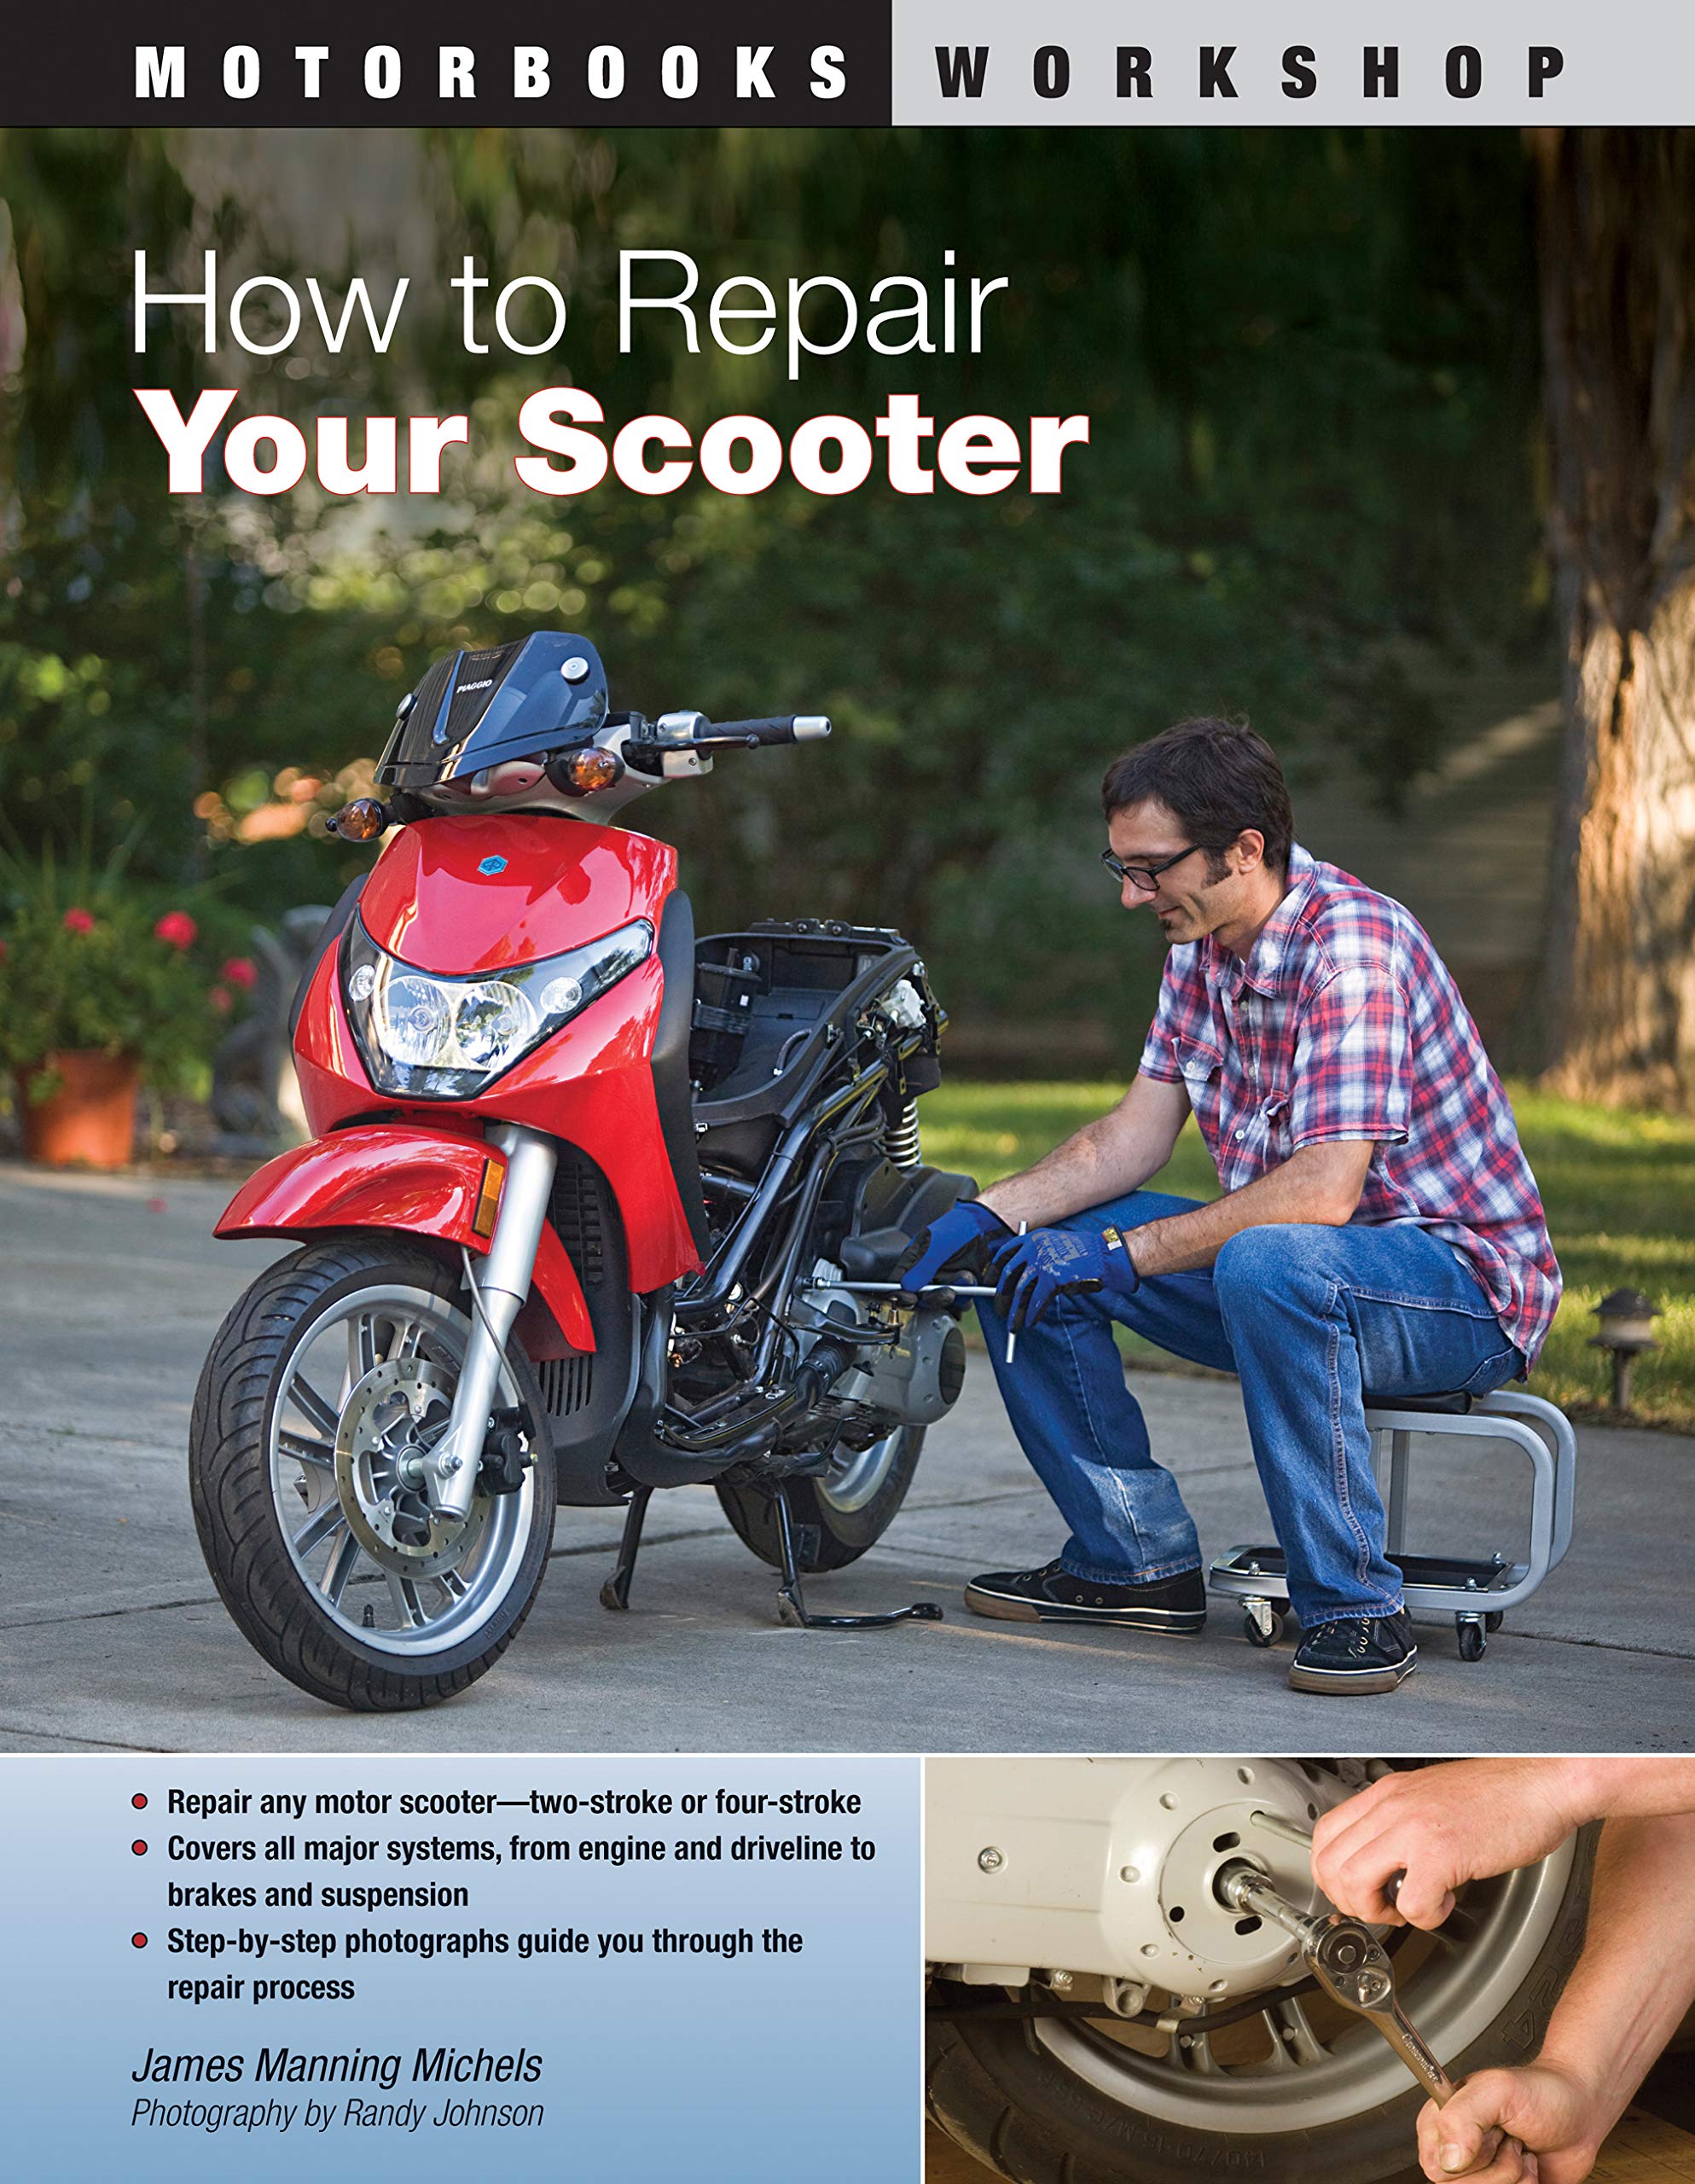 How to Repair Your Scooter